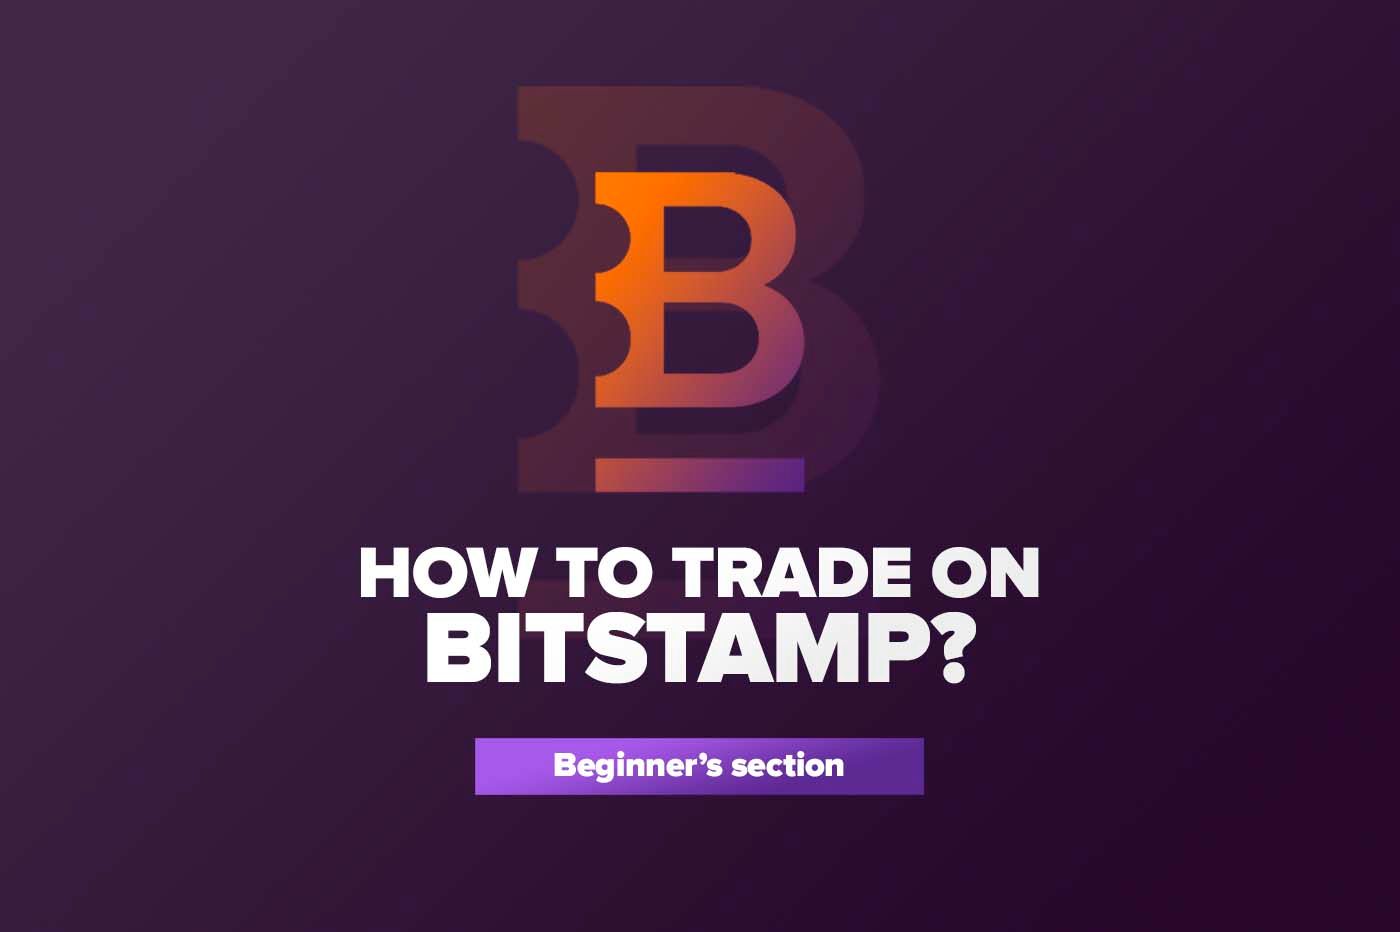 Article How to trade on BITSTAMP?